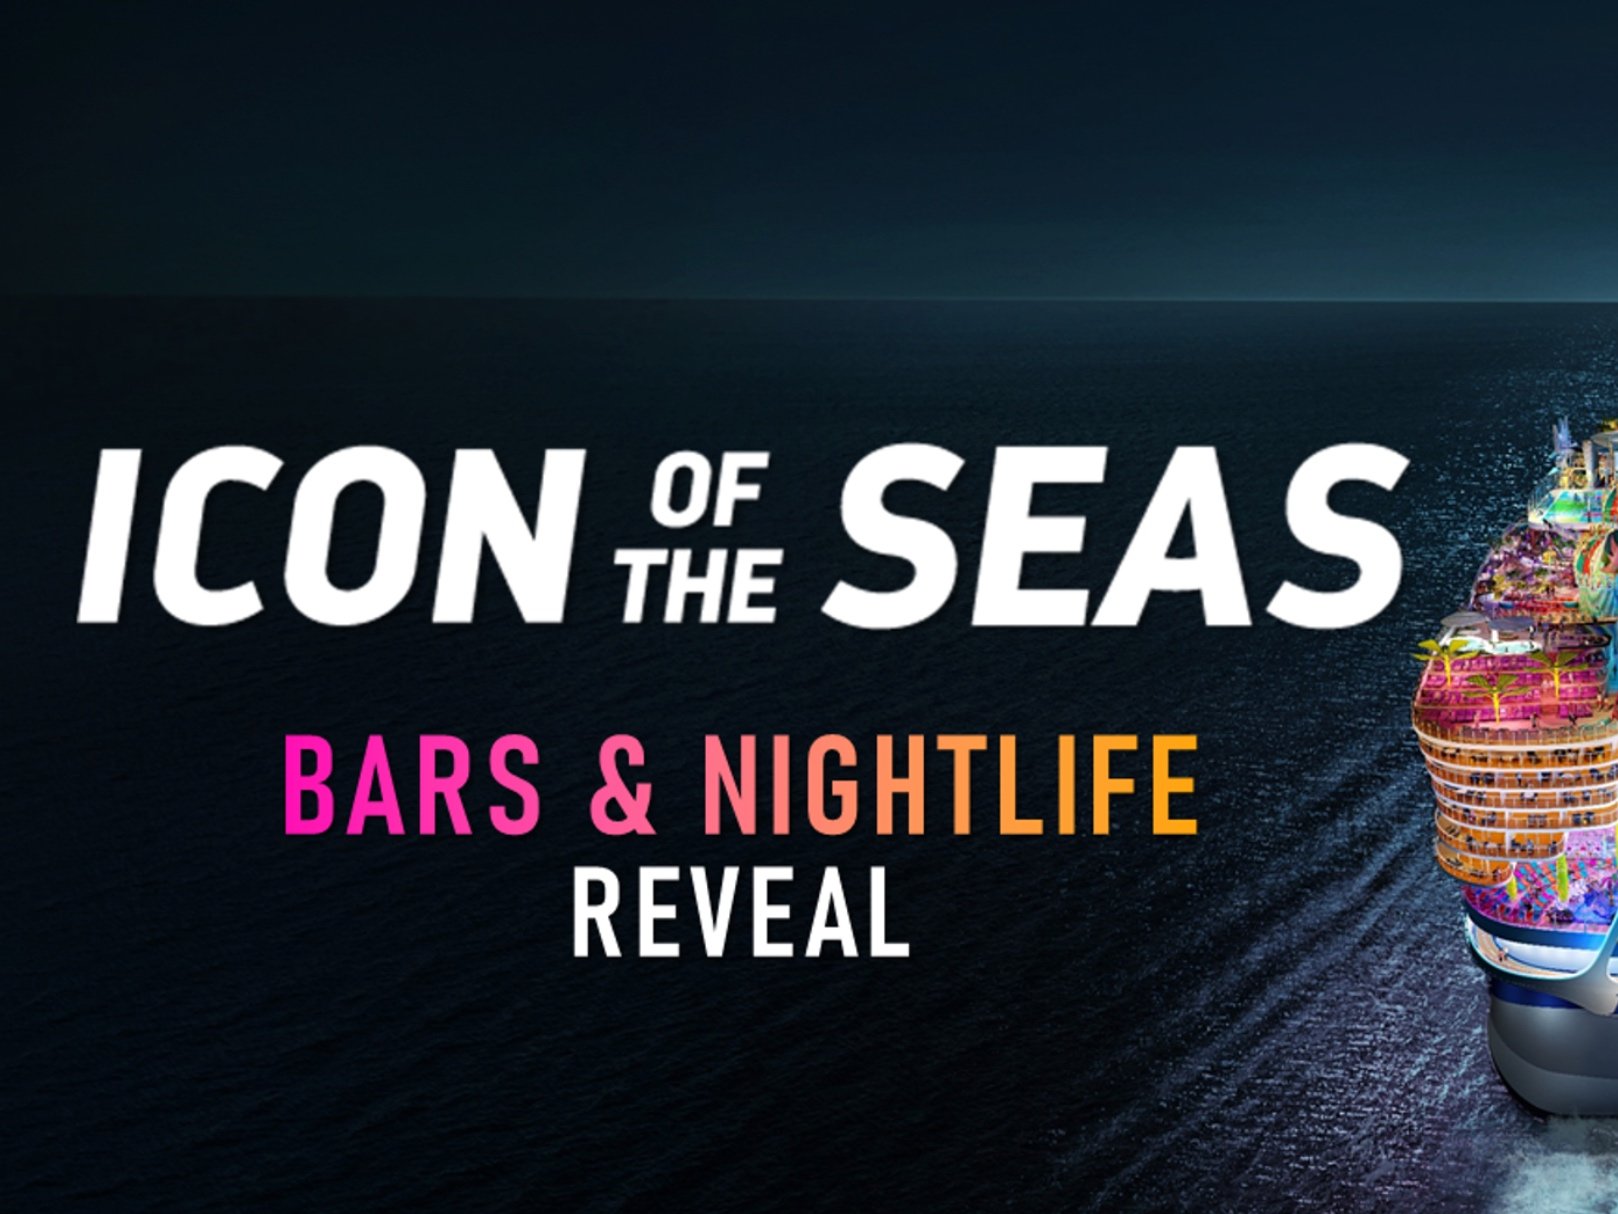 New Nightlife Venues Announced For Icon of the Seas